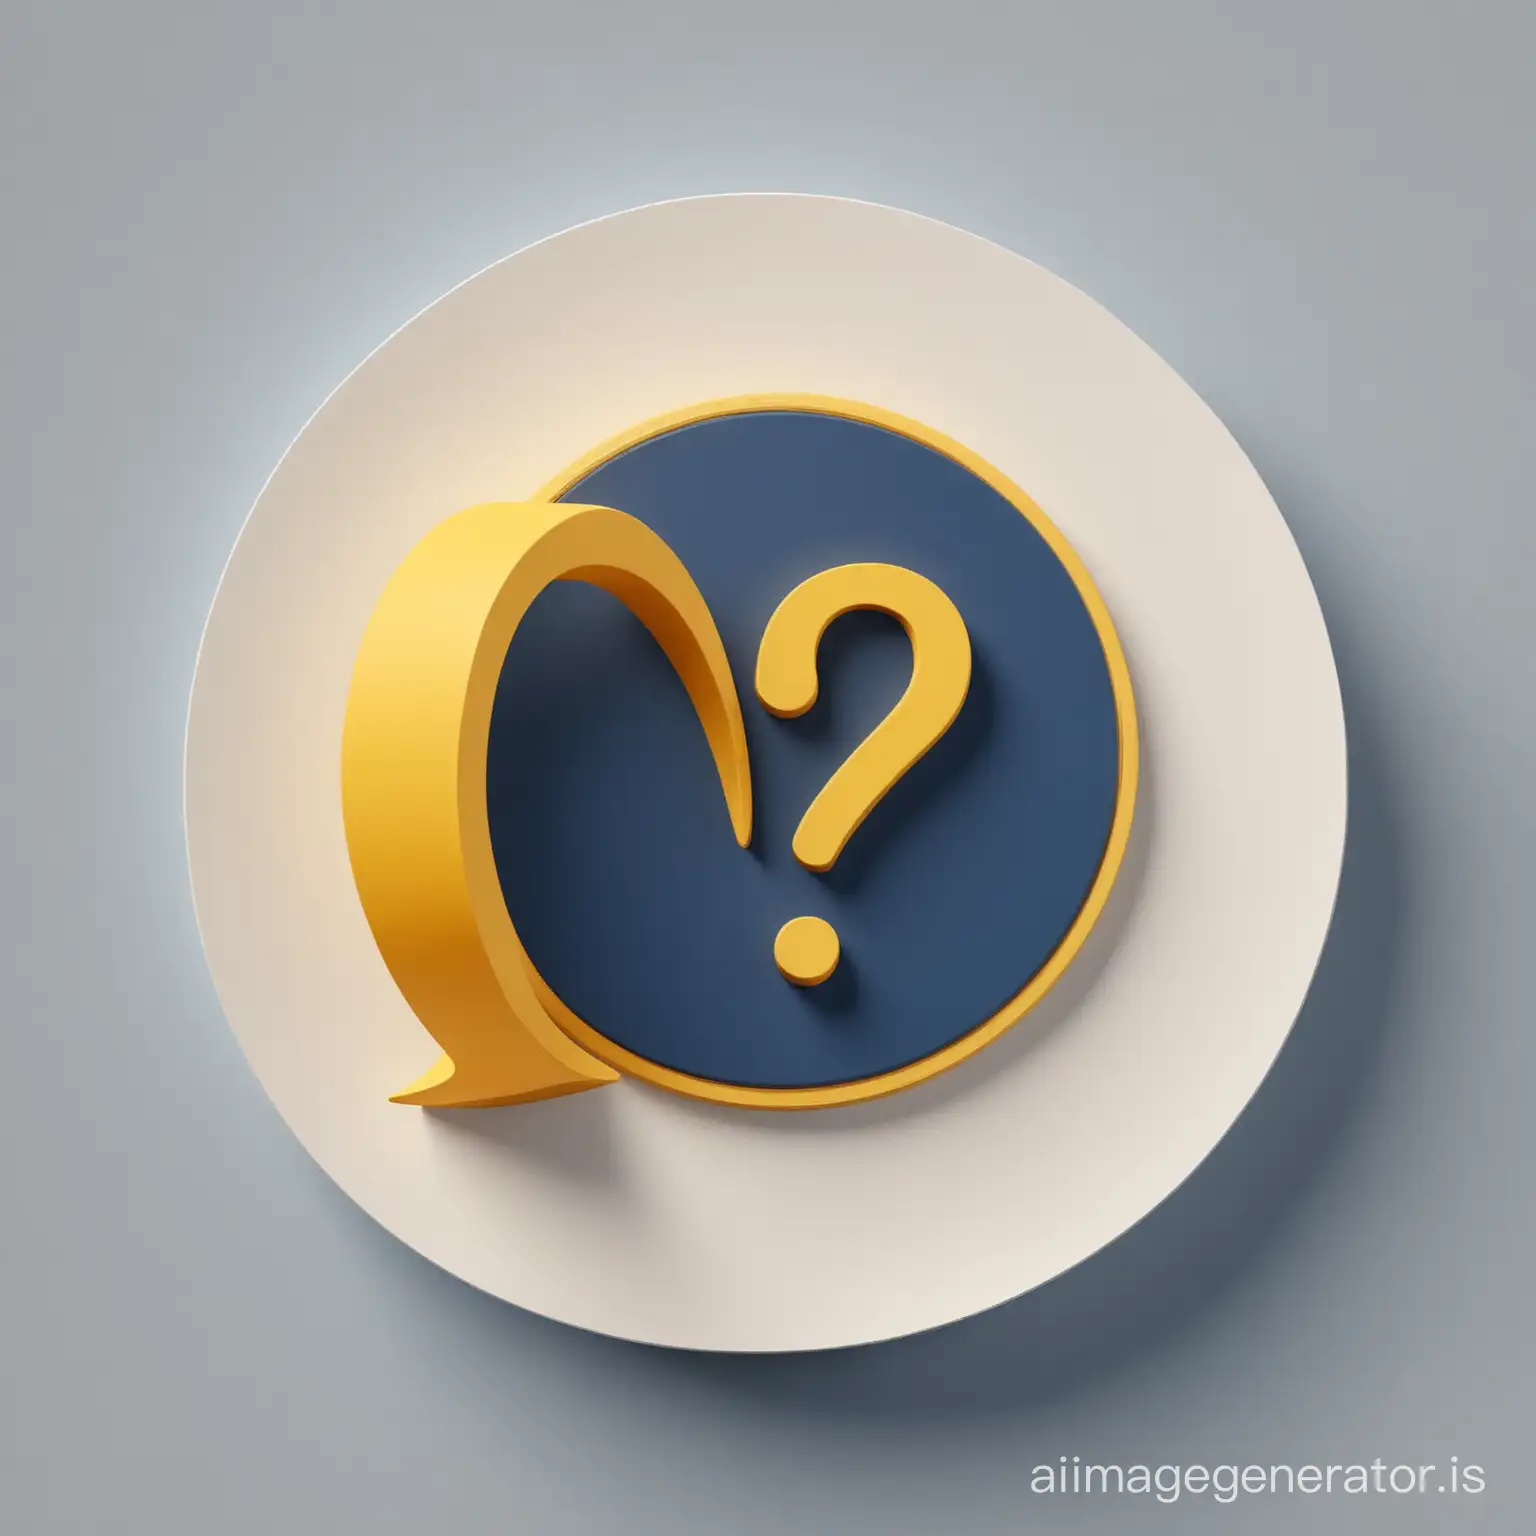 Create a 3D image of a dark blue shaped icon of a person profile and a yellow colored exclamation point within a white colored circle in the center with Brnanco background